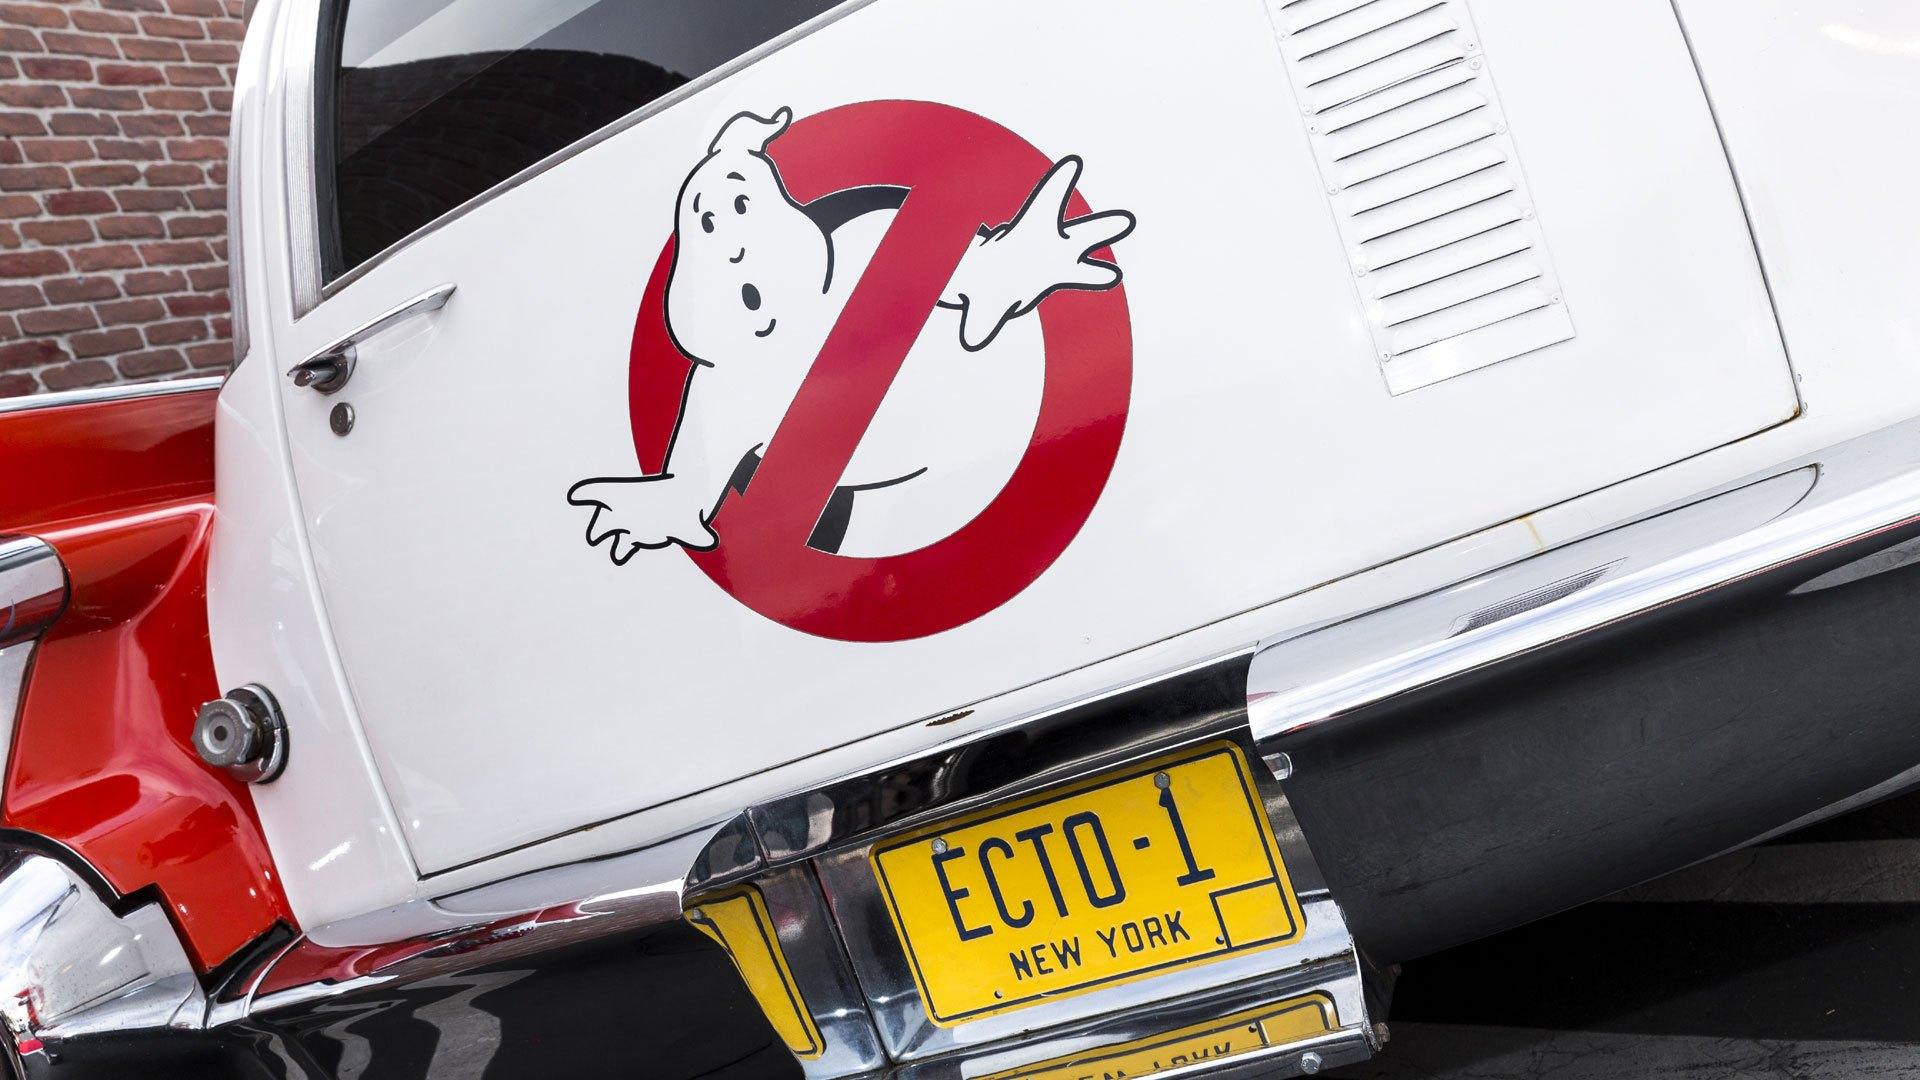 Geek out: Movie trailers for 'Ghostbusters: Afterlife